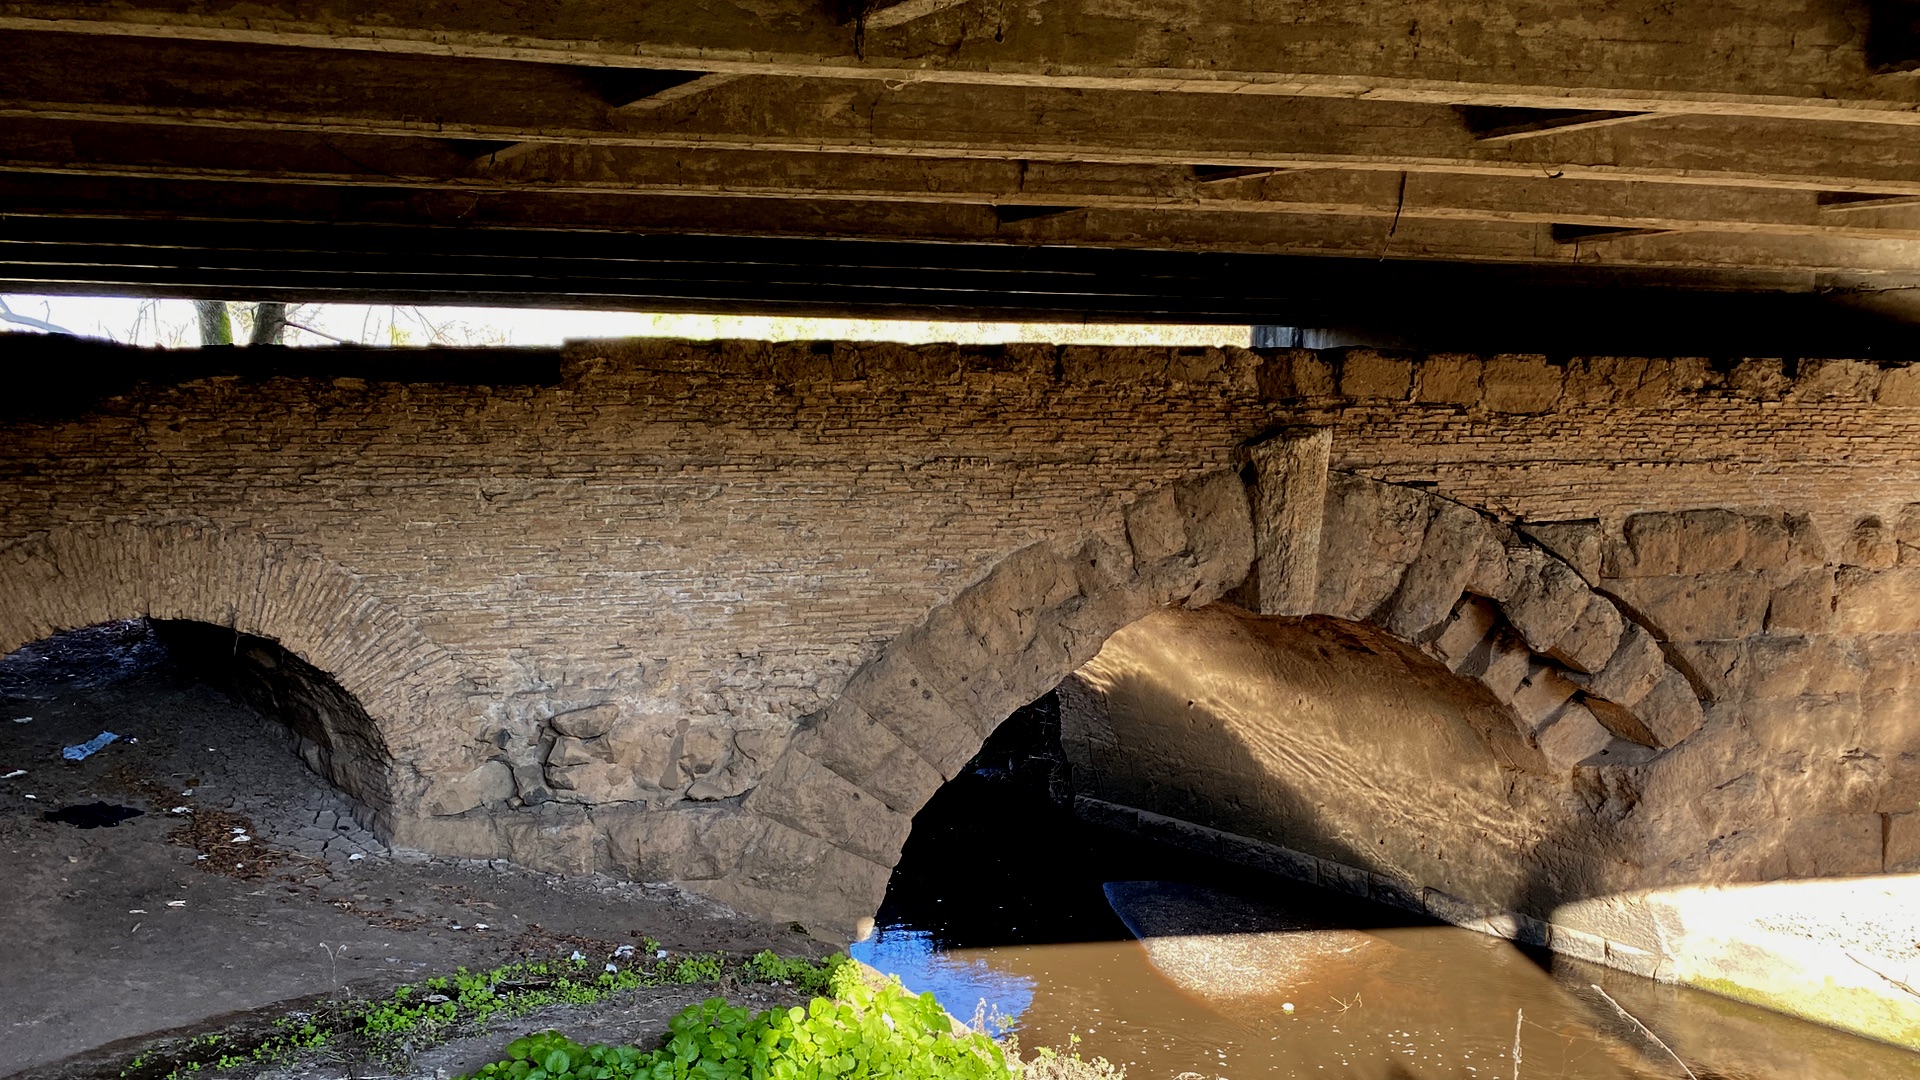 Two arches of an old Roman bridge hidden under the carriageway of a large modern road